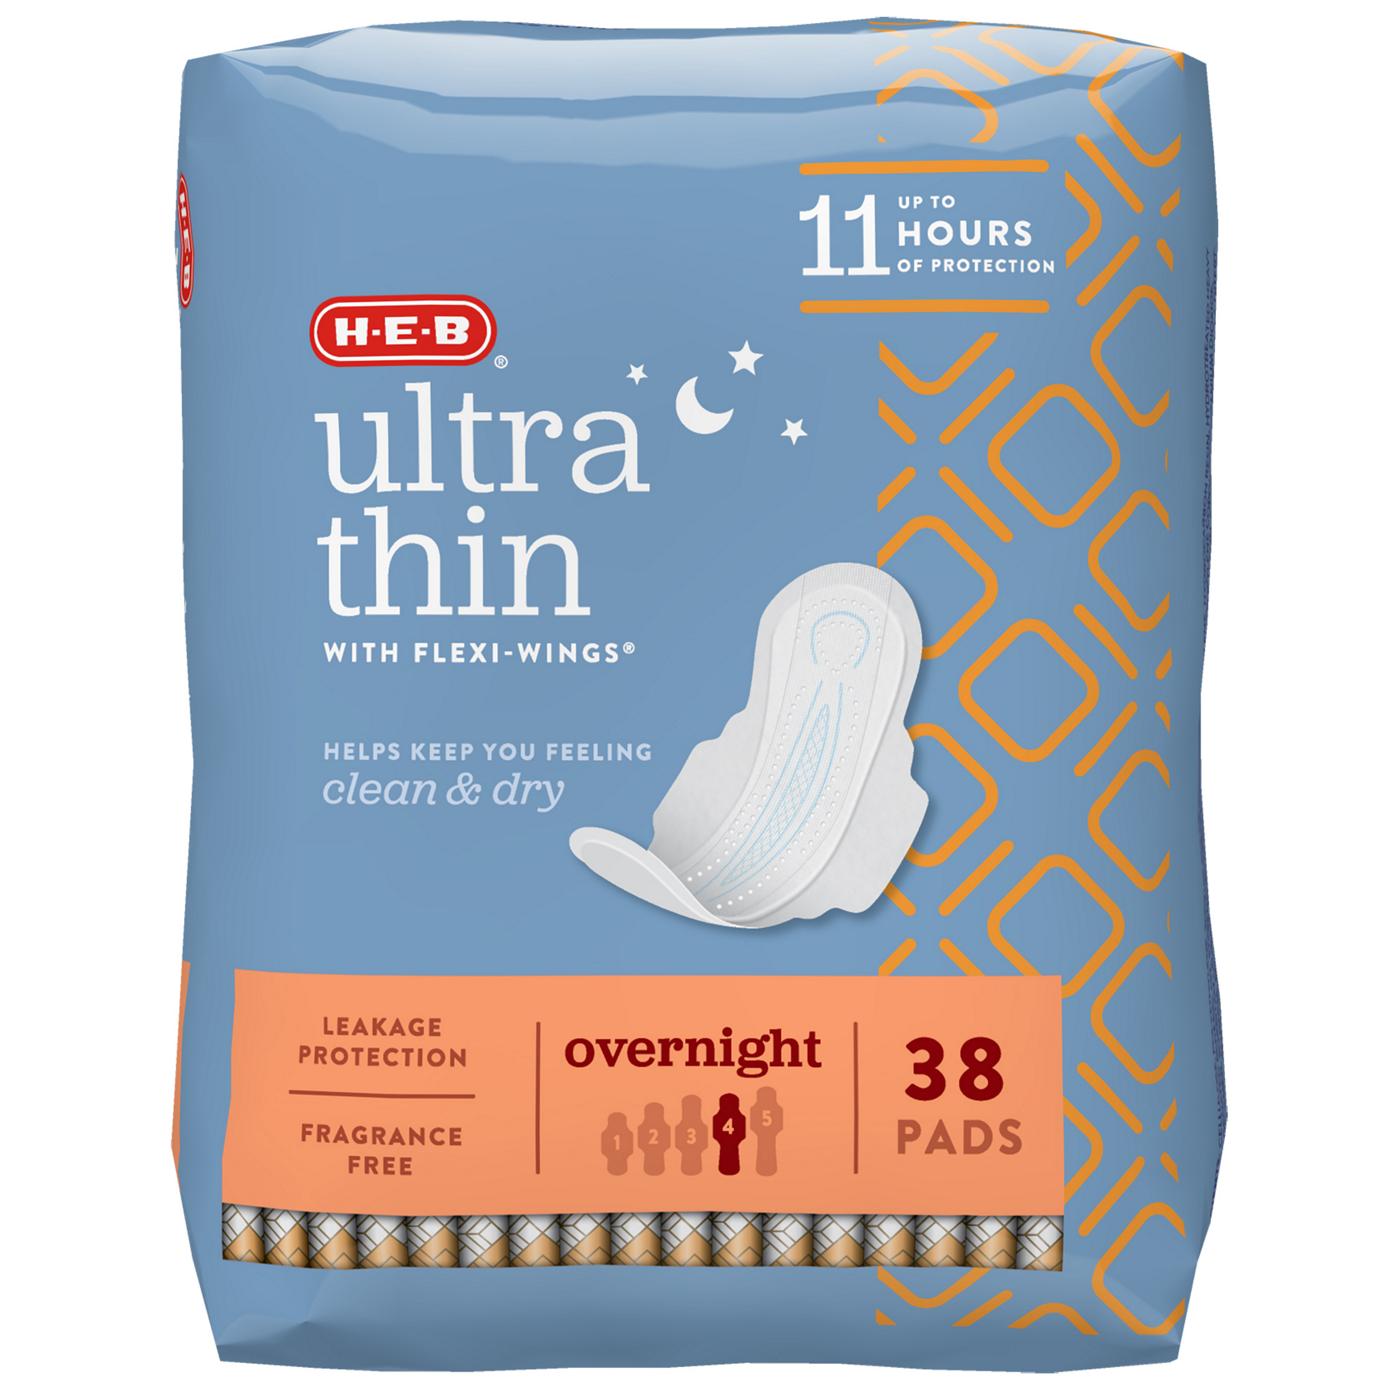 H-E-B Ultra Thin with Flexi-Wings Overnight Pads; image 1 of 7